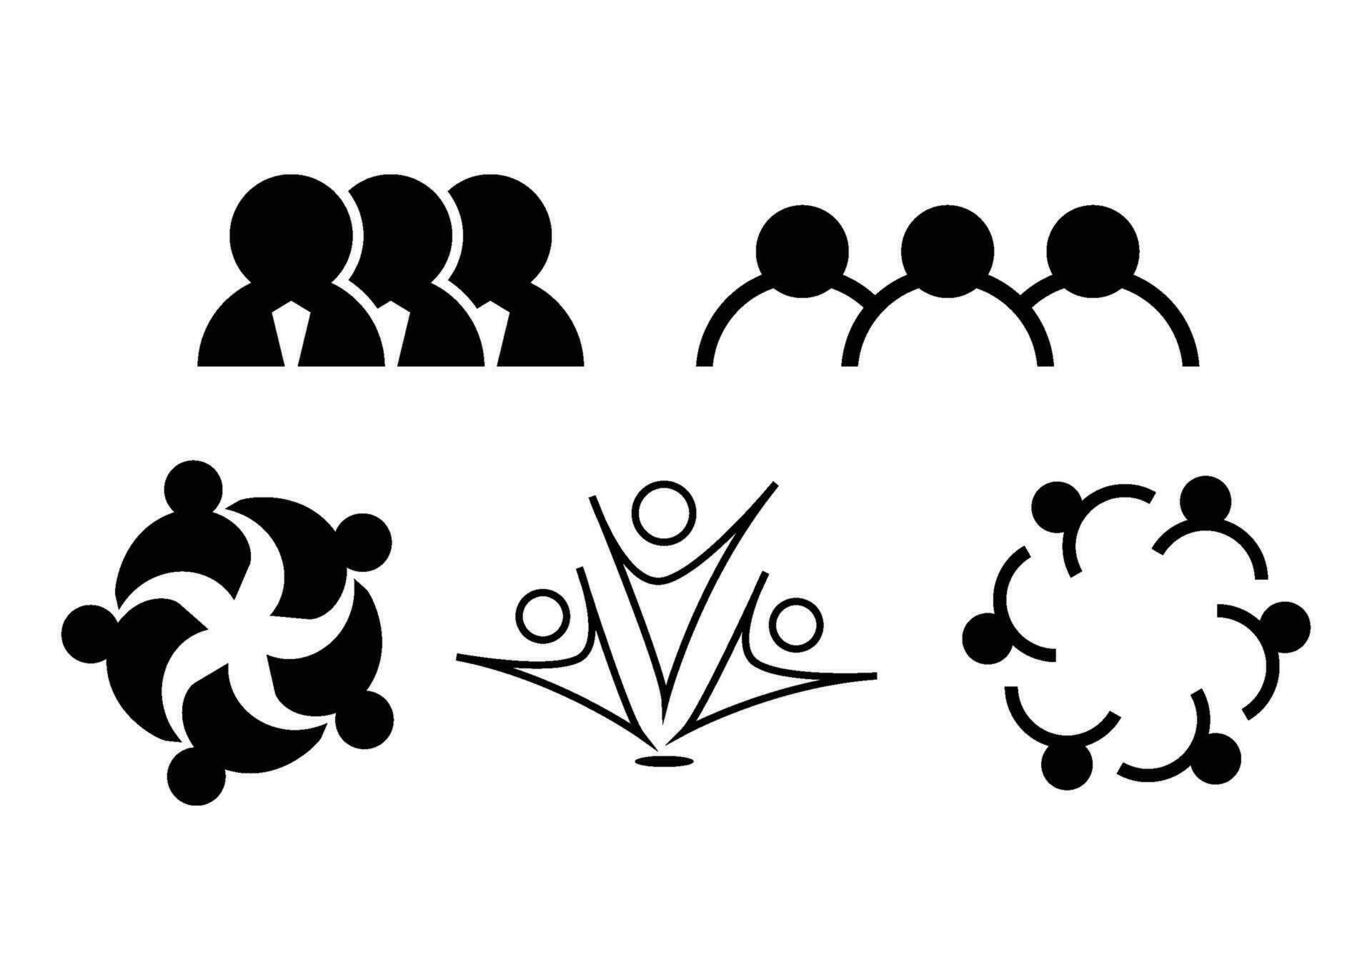 Community icon silhouette group isolated vector